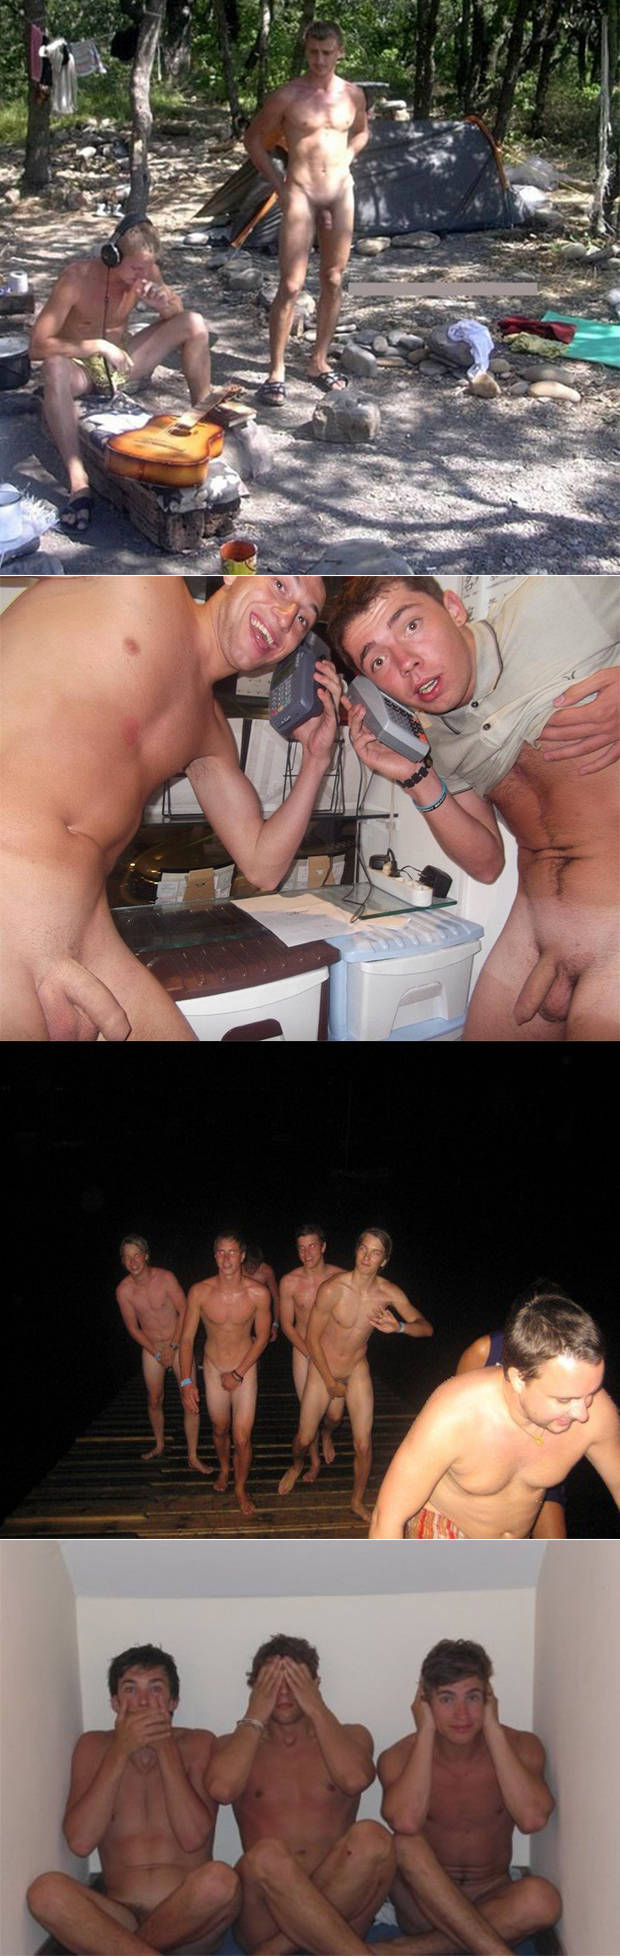 naked amateur guys in public